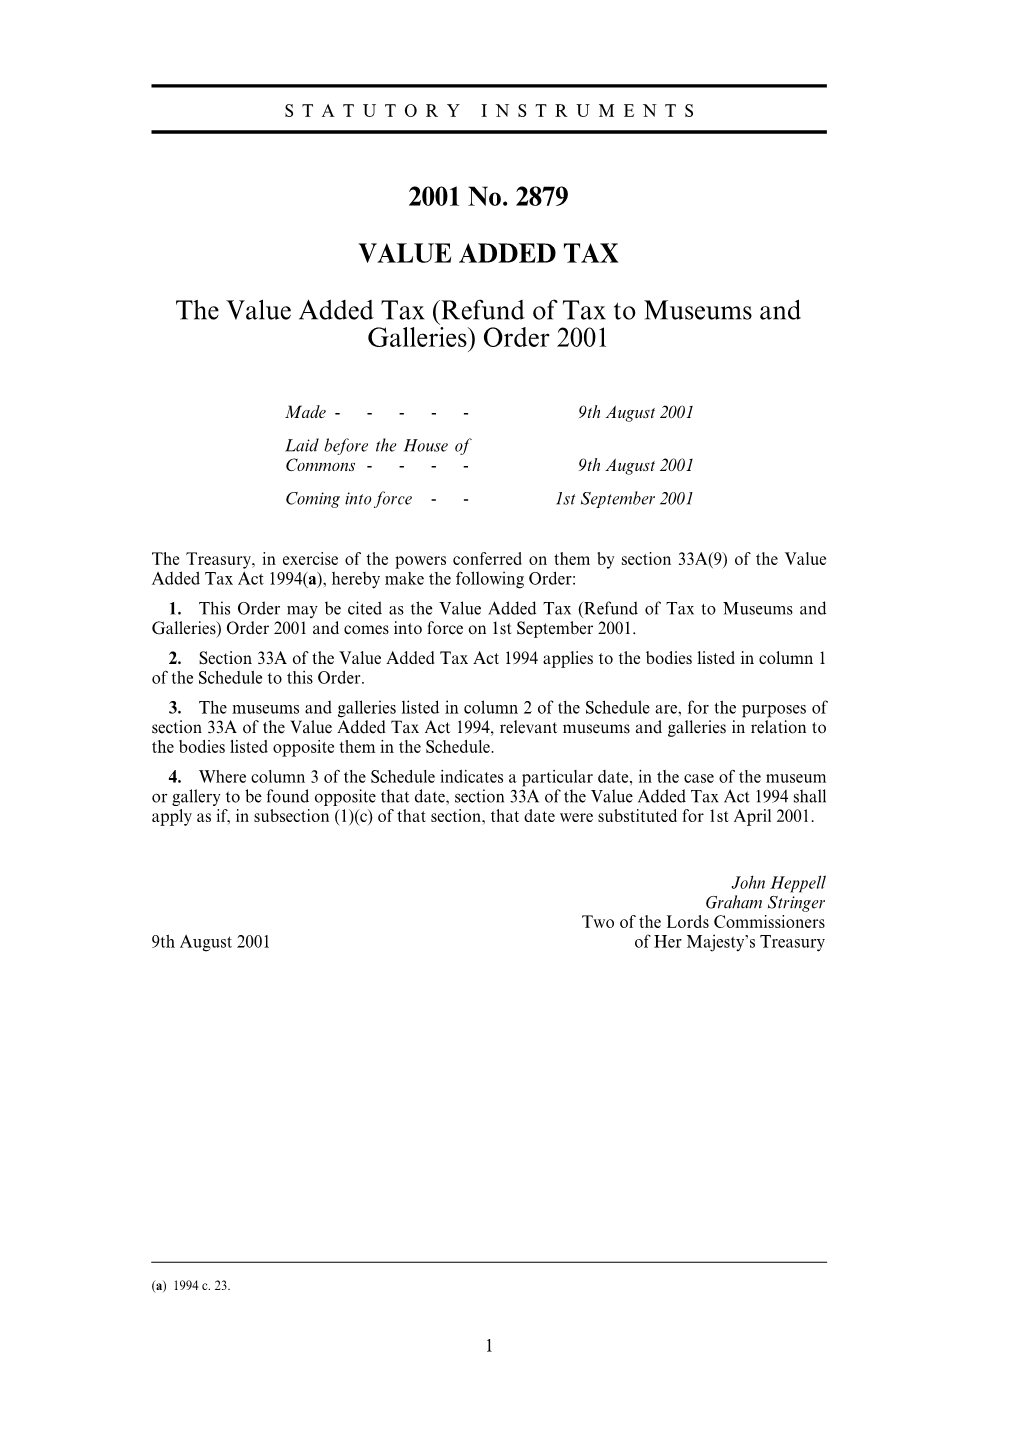 (Refund of Tax to Museums and Galleries) Order 2001